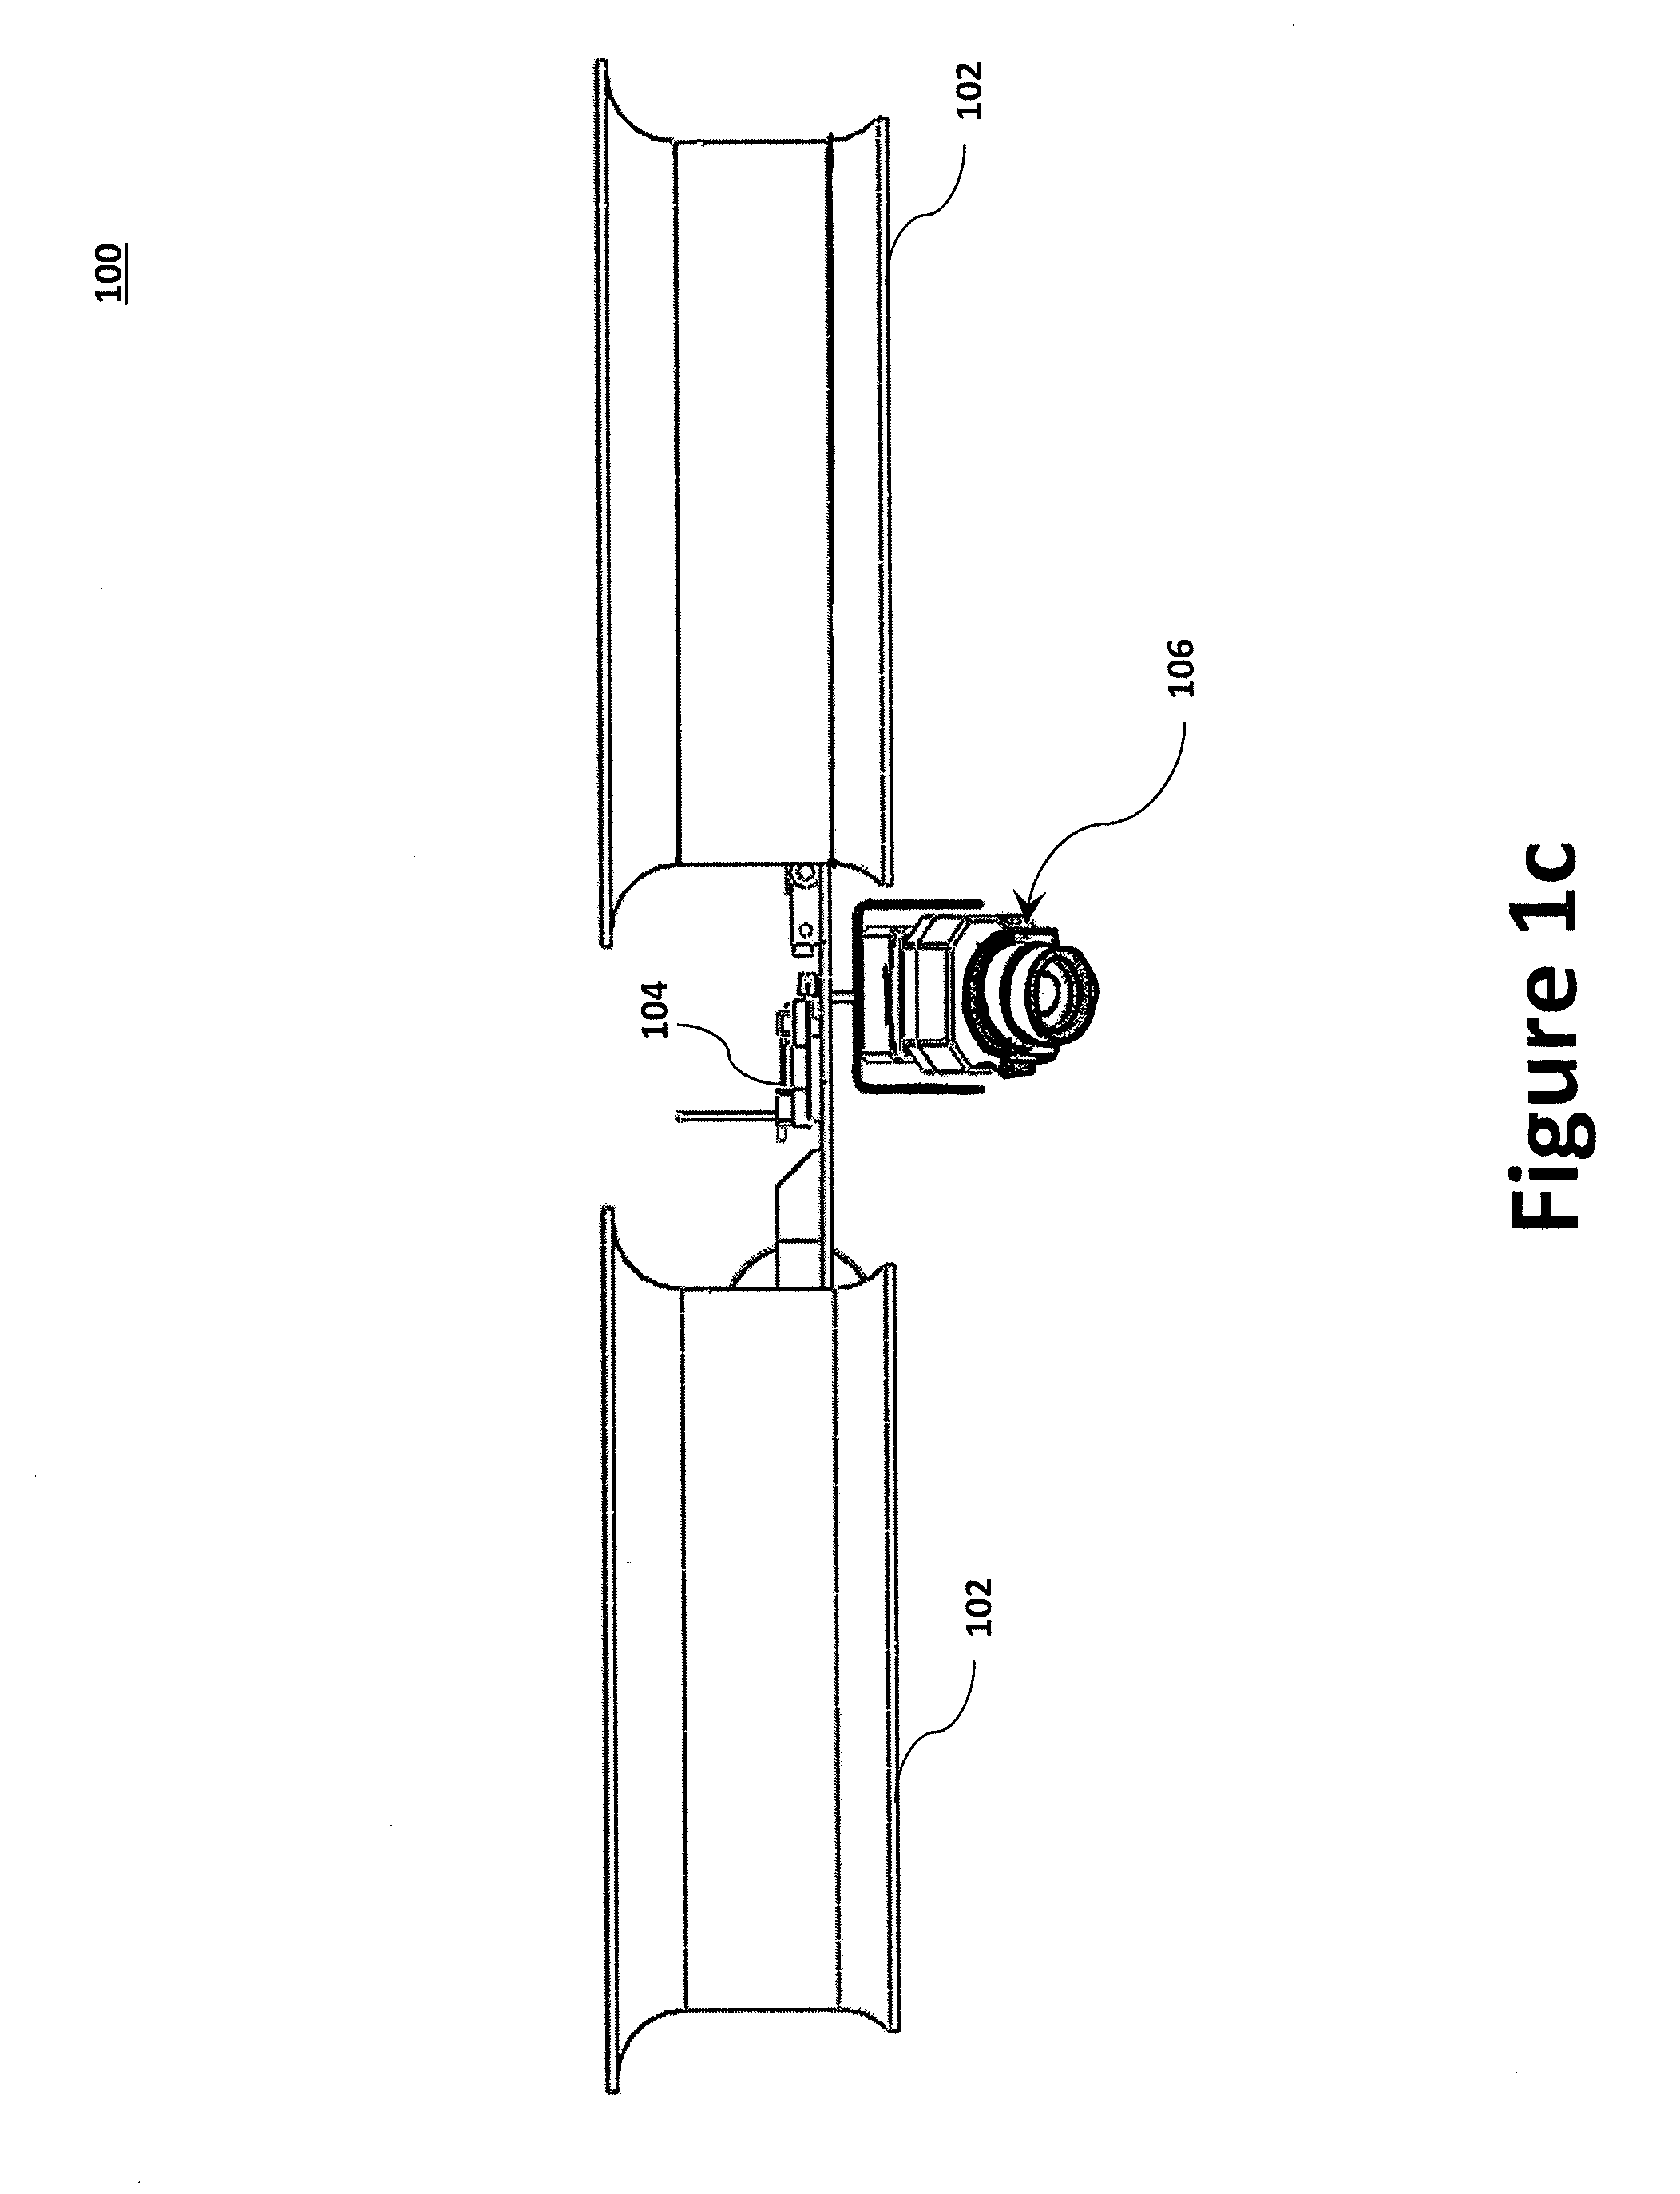 Tethered aerial system for data gathering